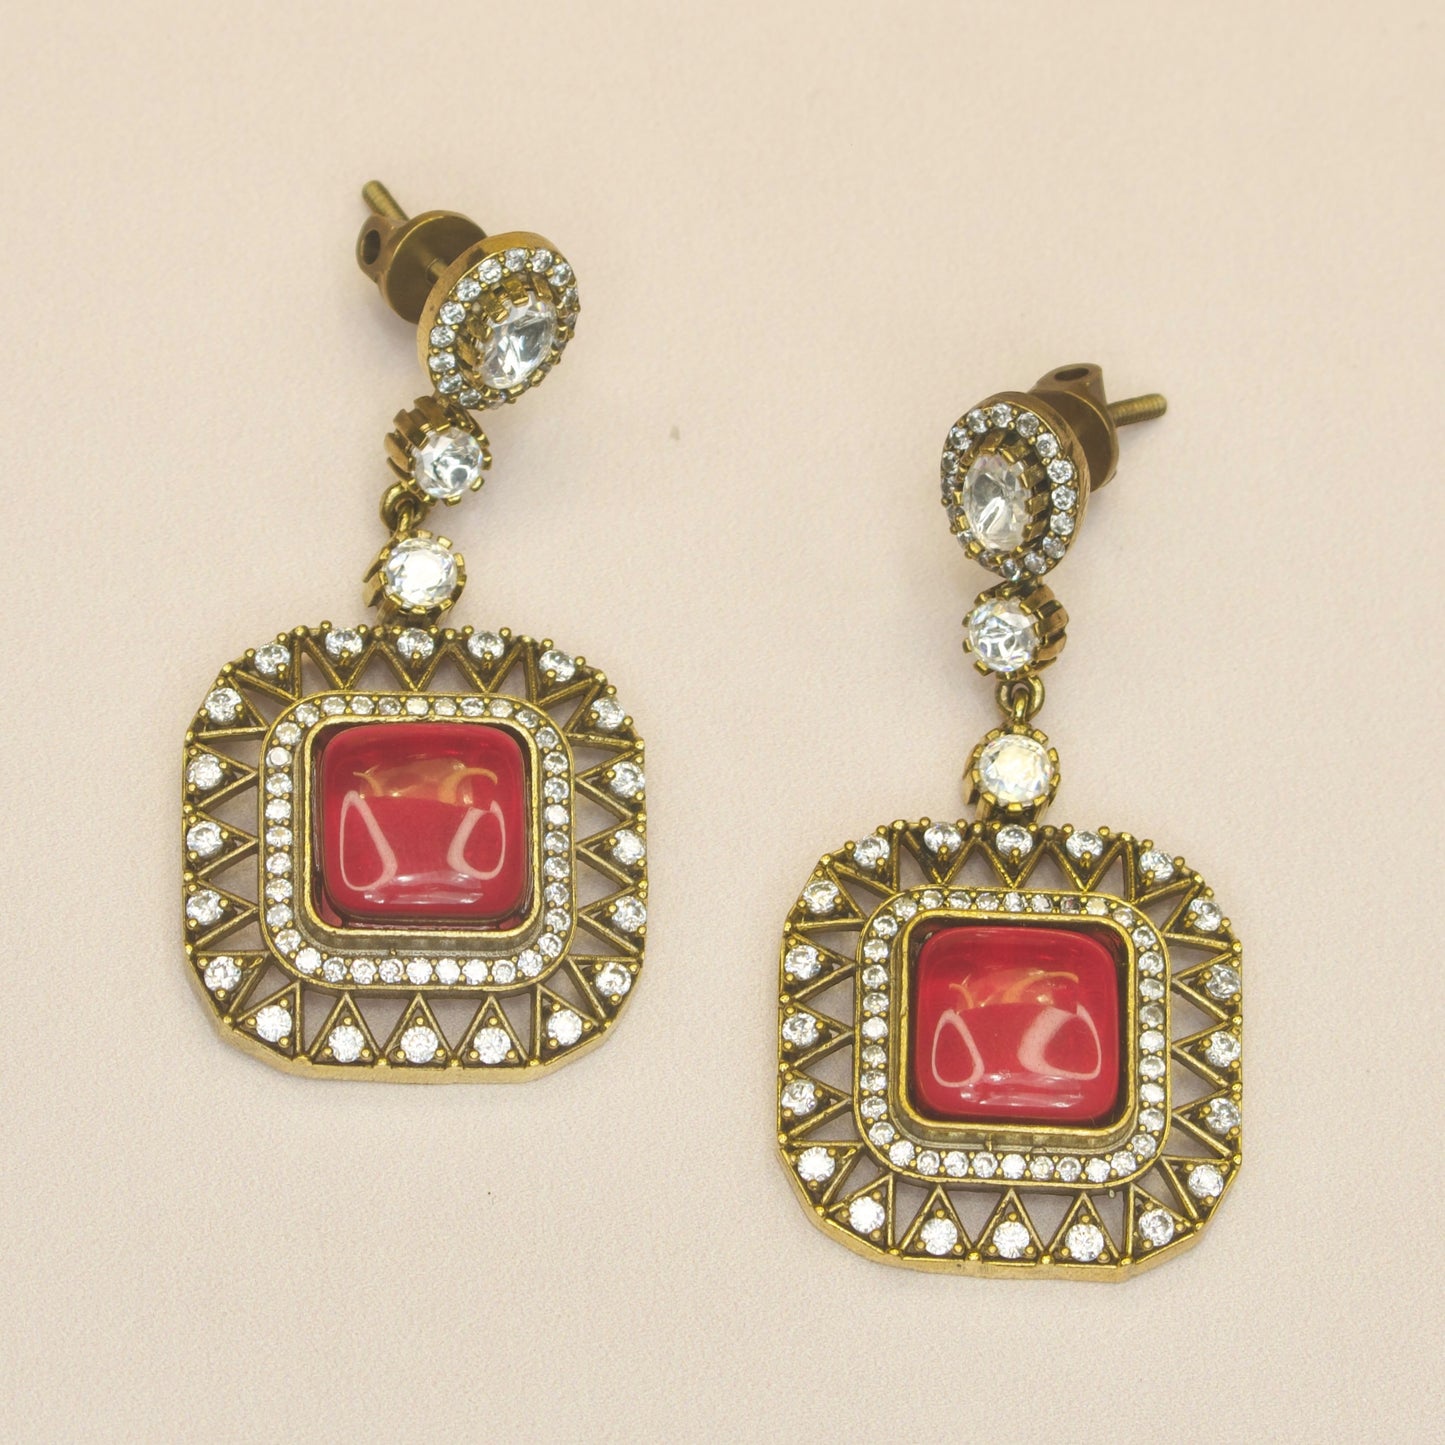 Two-Line Victorian Diamond Necklace with earrings